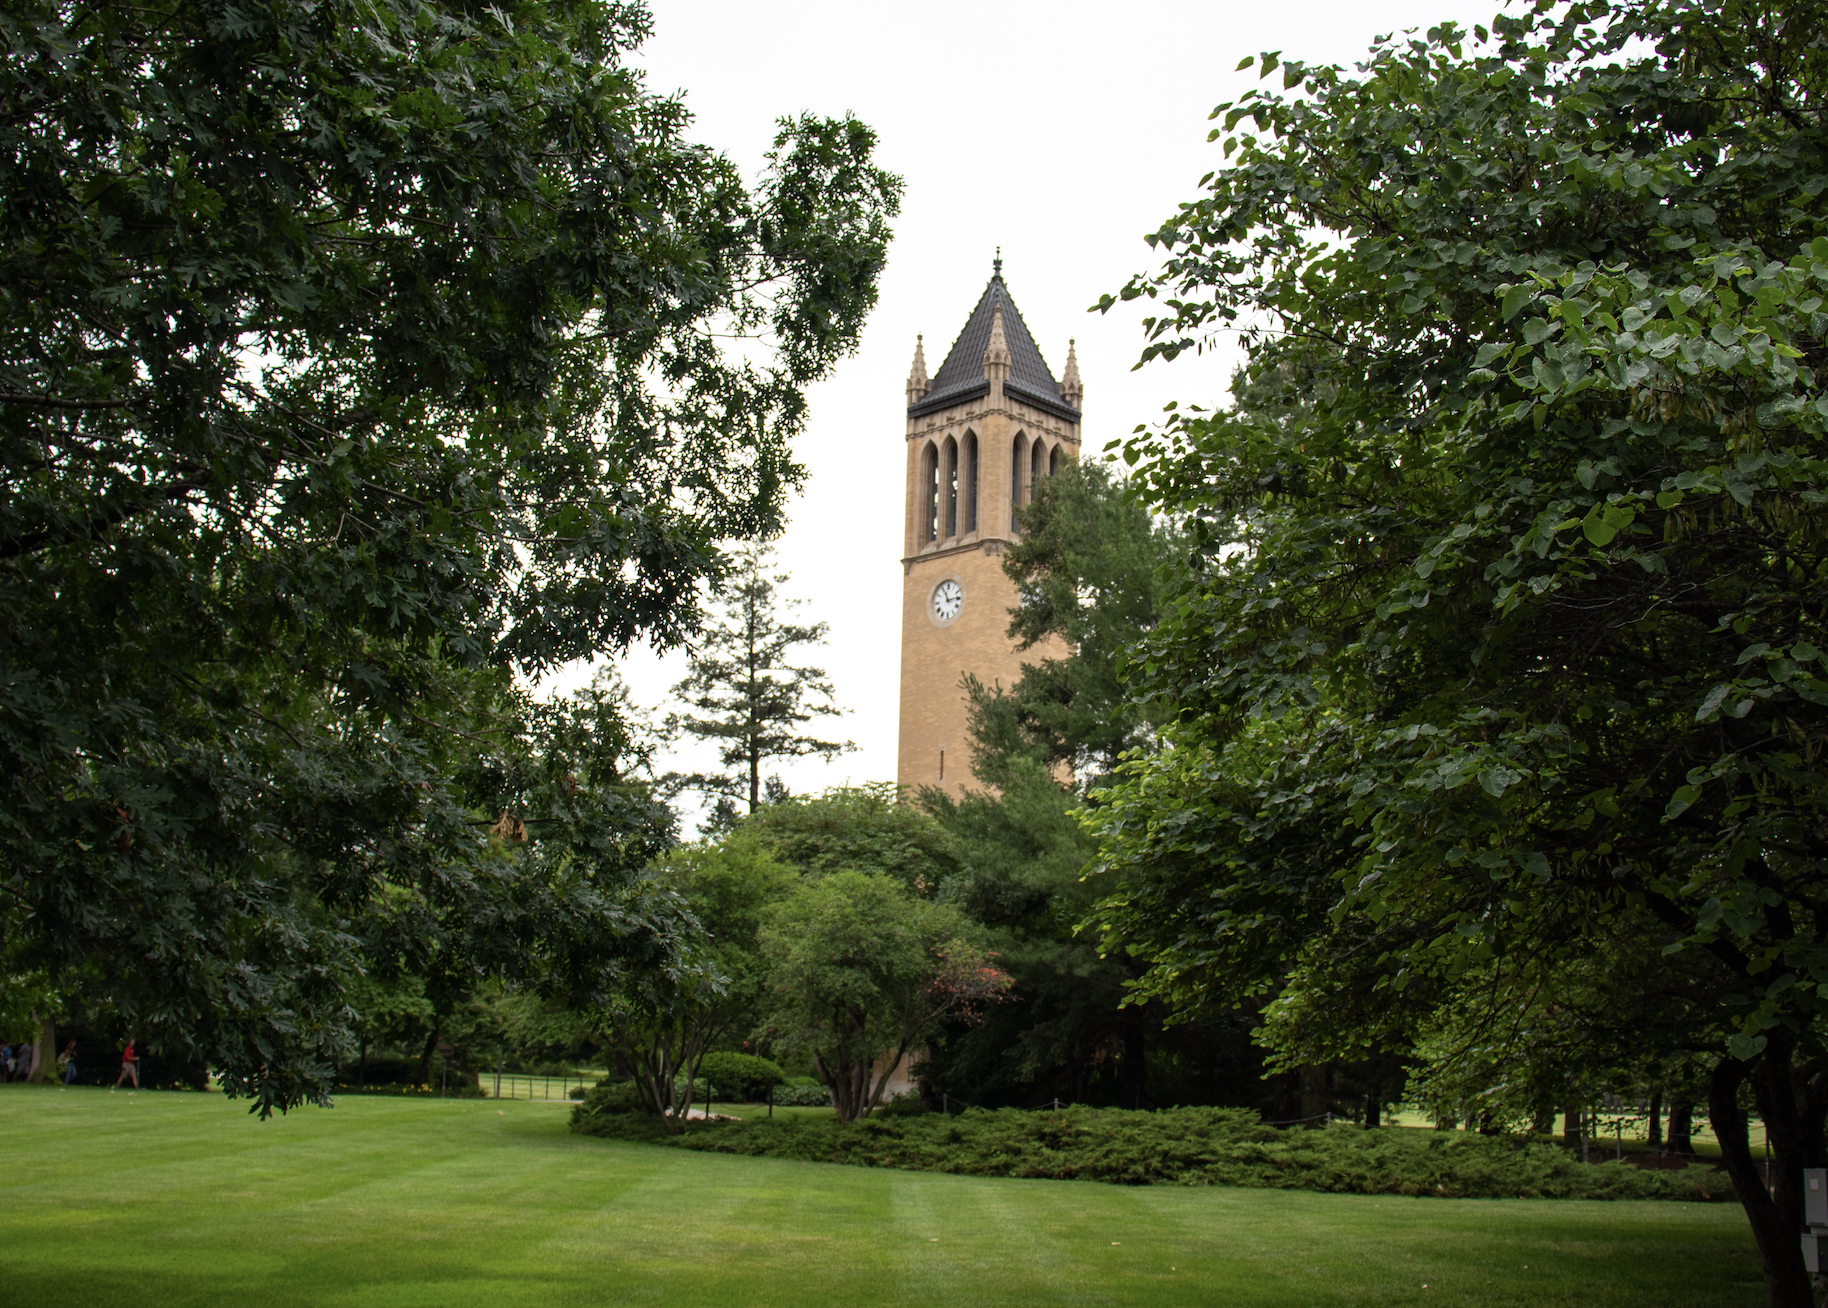 Campanile in trees from southeast angle